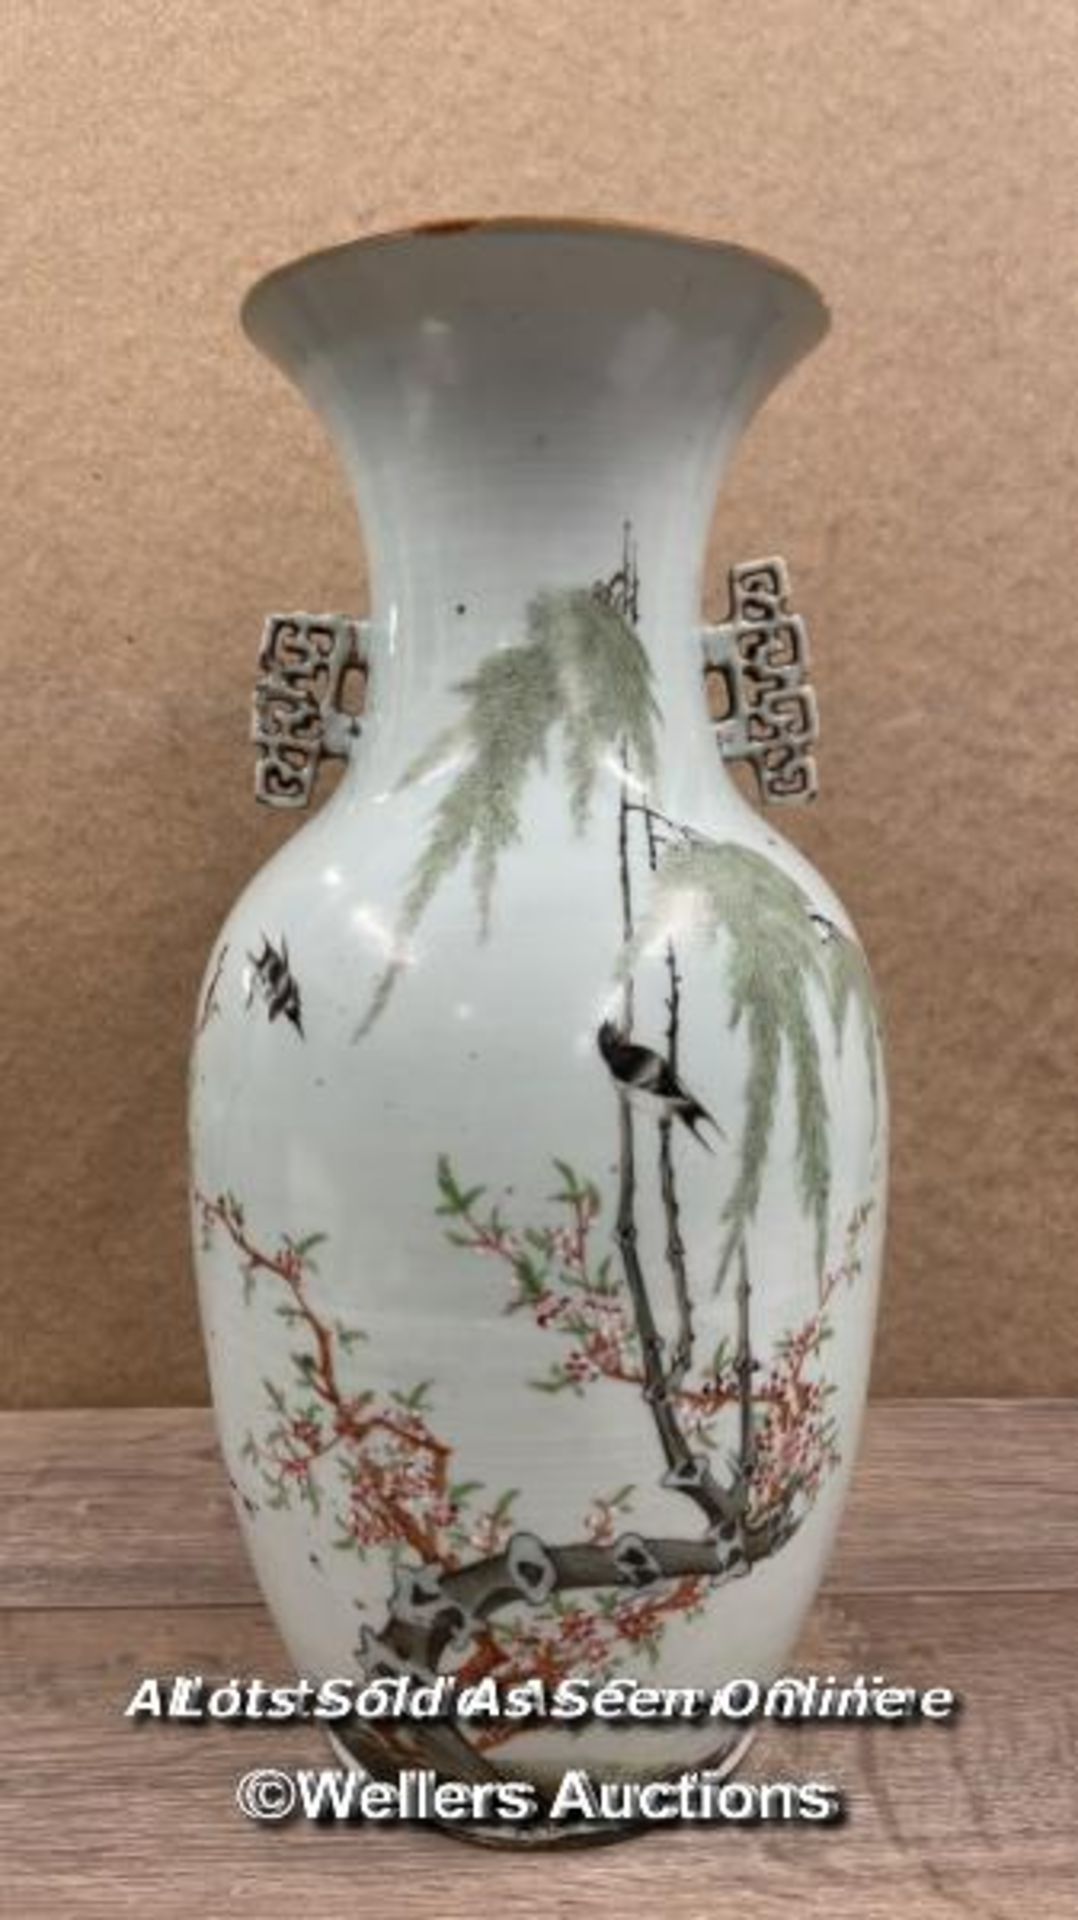 A LARGE JAPANESE VASE DECORATED WITH DETAILED BIRDS AND FLOWERS, DAMAGE TO ONE OF THE FINIALS.